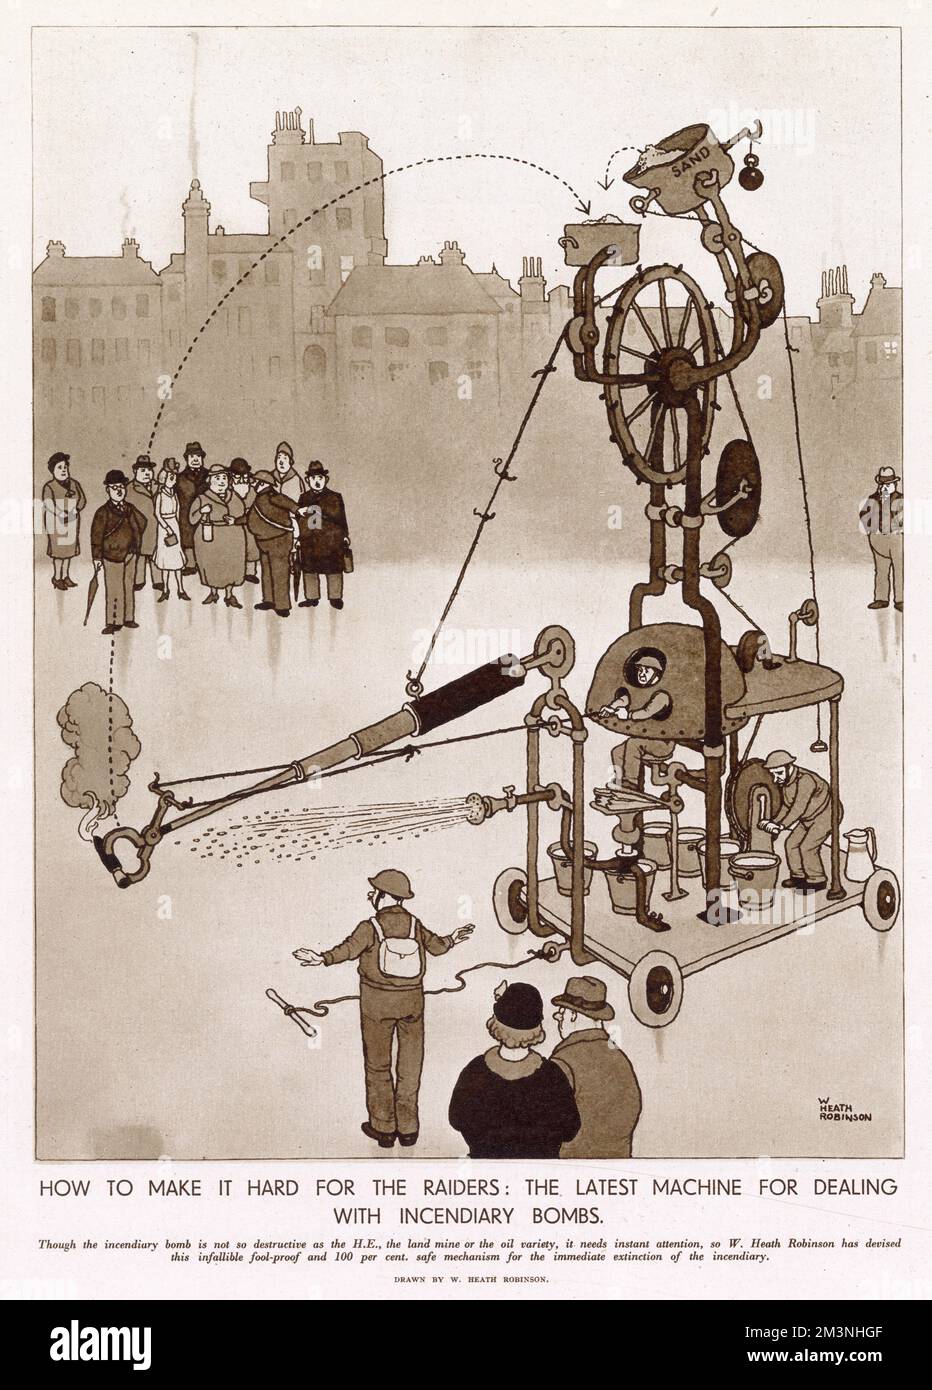 A William Heath Robinson's machine to extinguish a incendiary bomb from a distance. Stock Photo